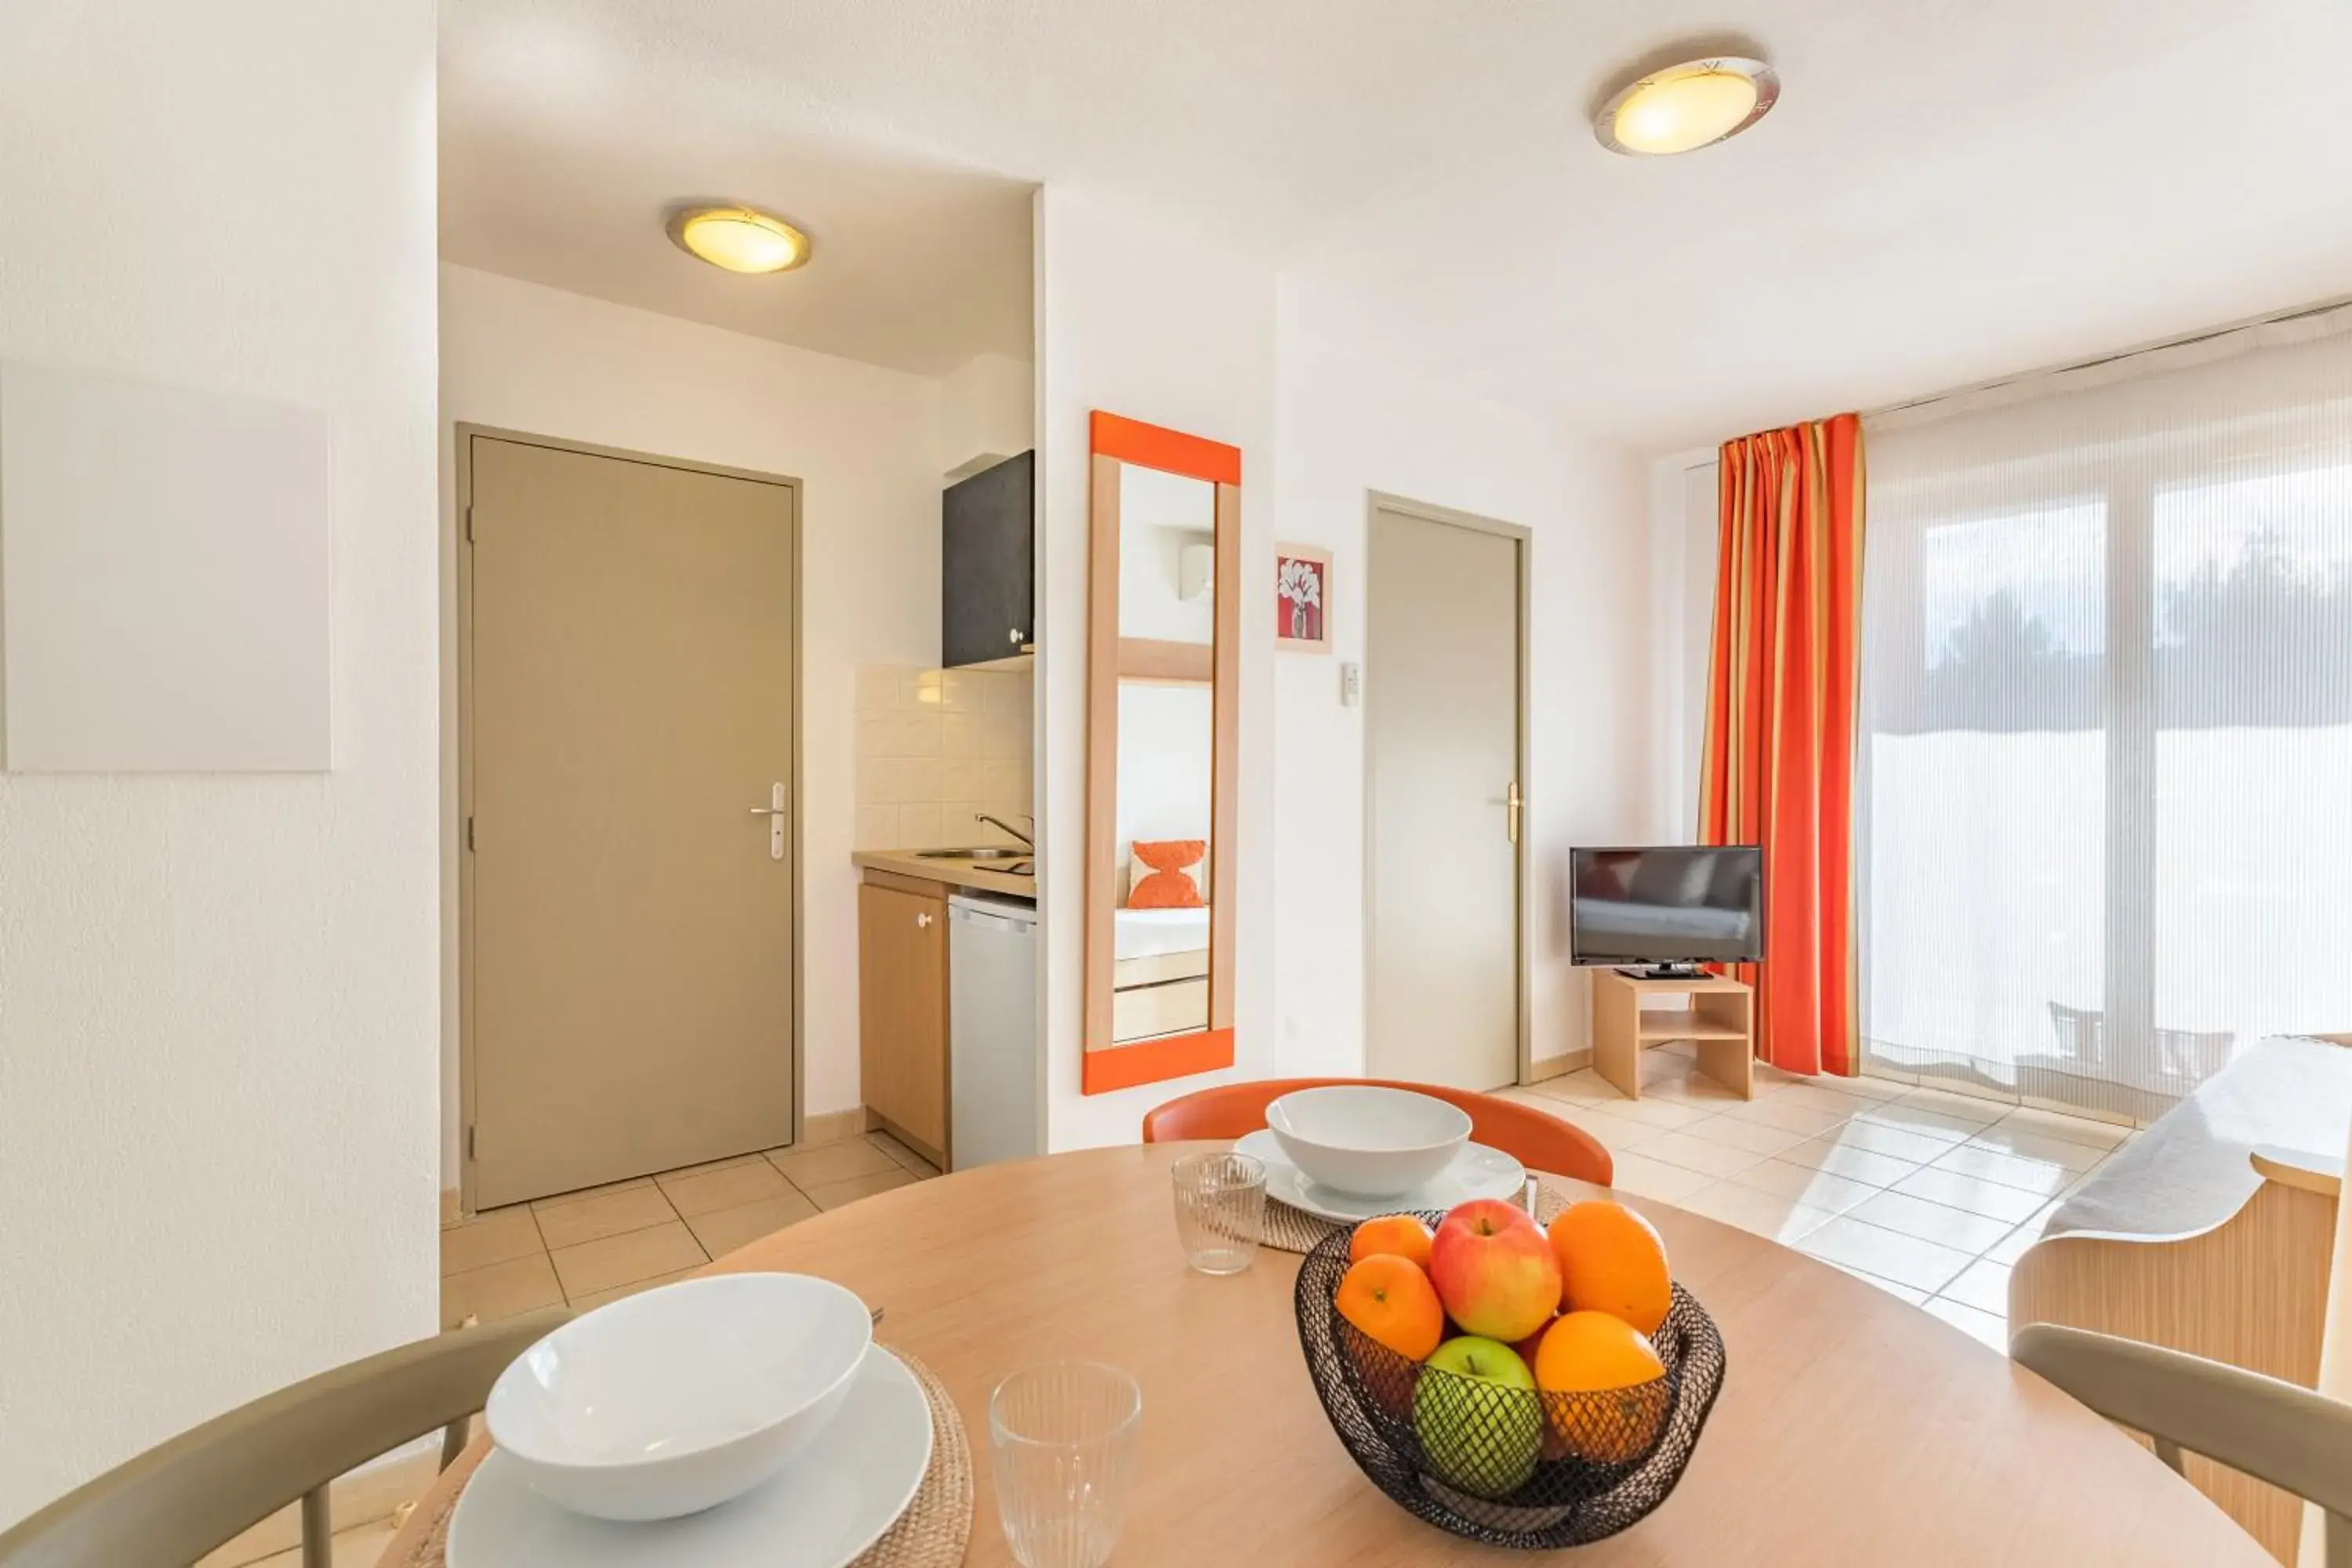 TV and multimedia, Dining Area in Appart'City Aix en Provence - La Duranne